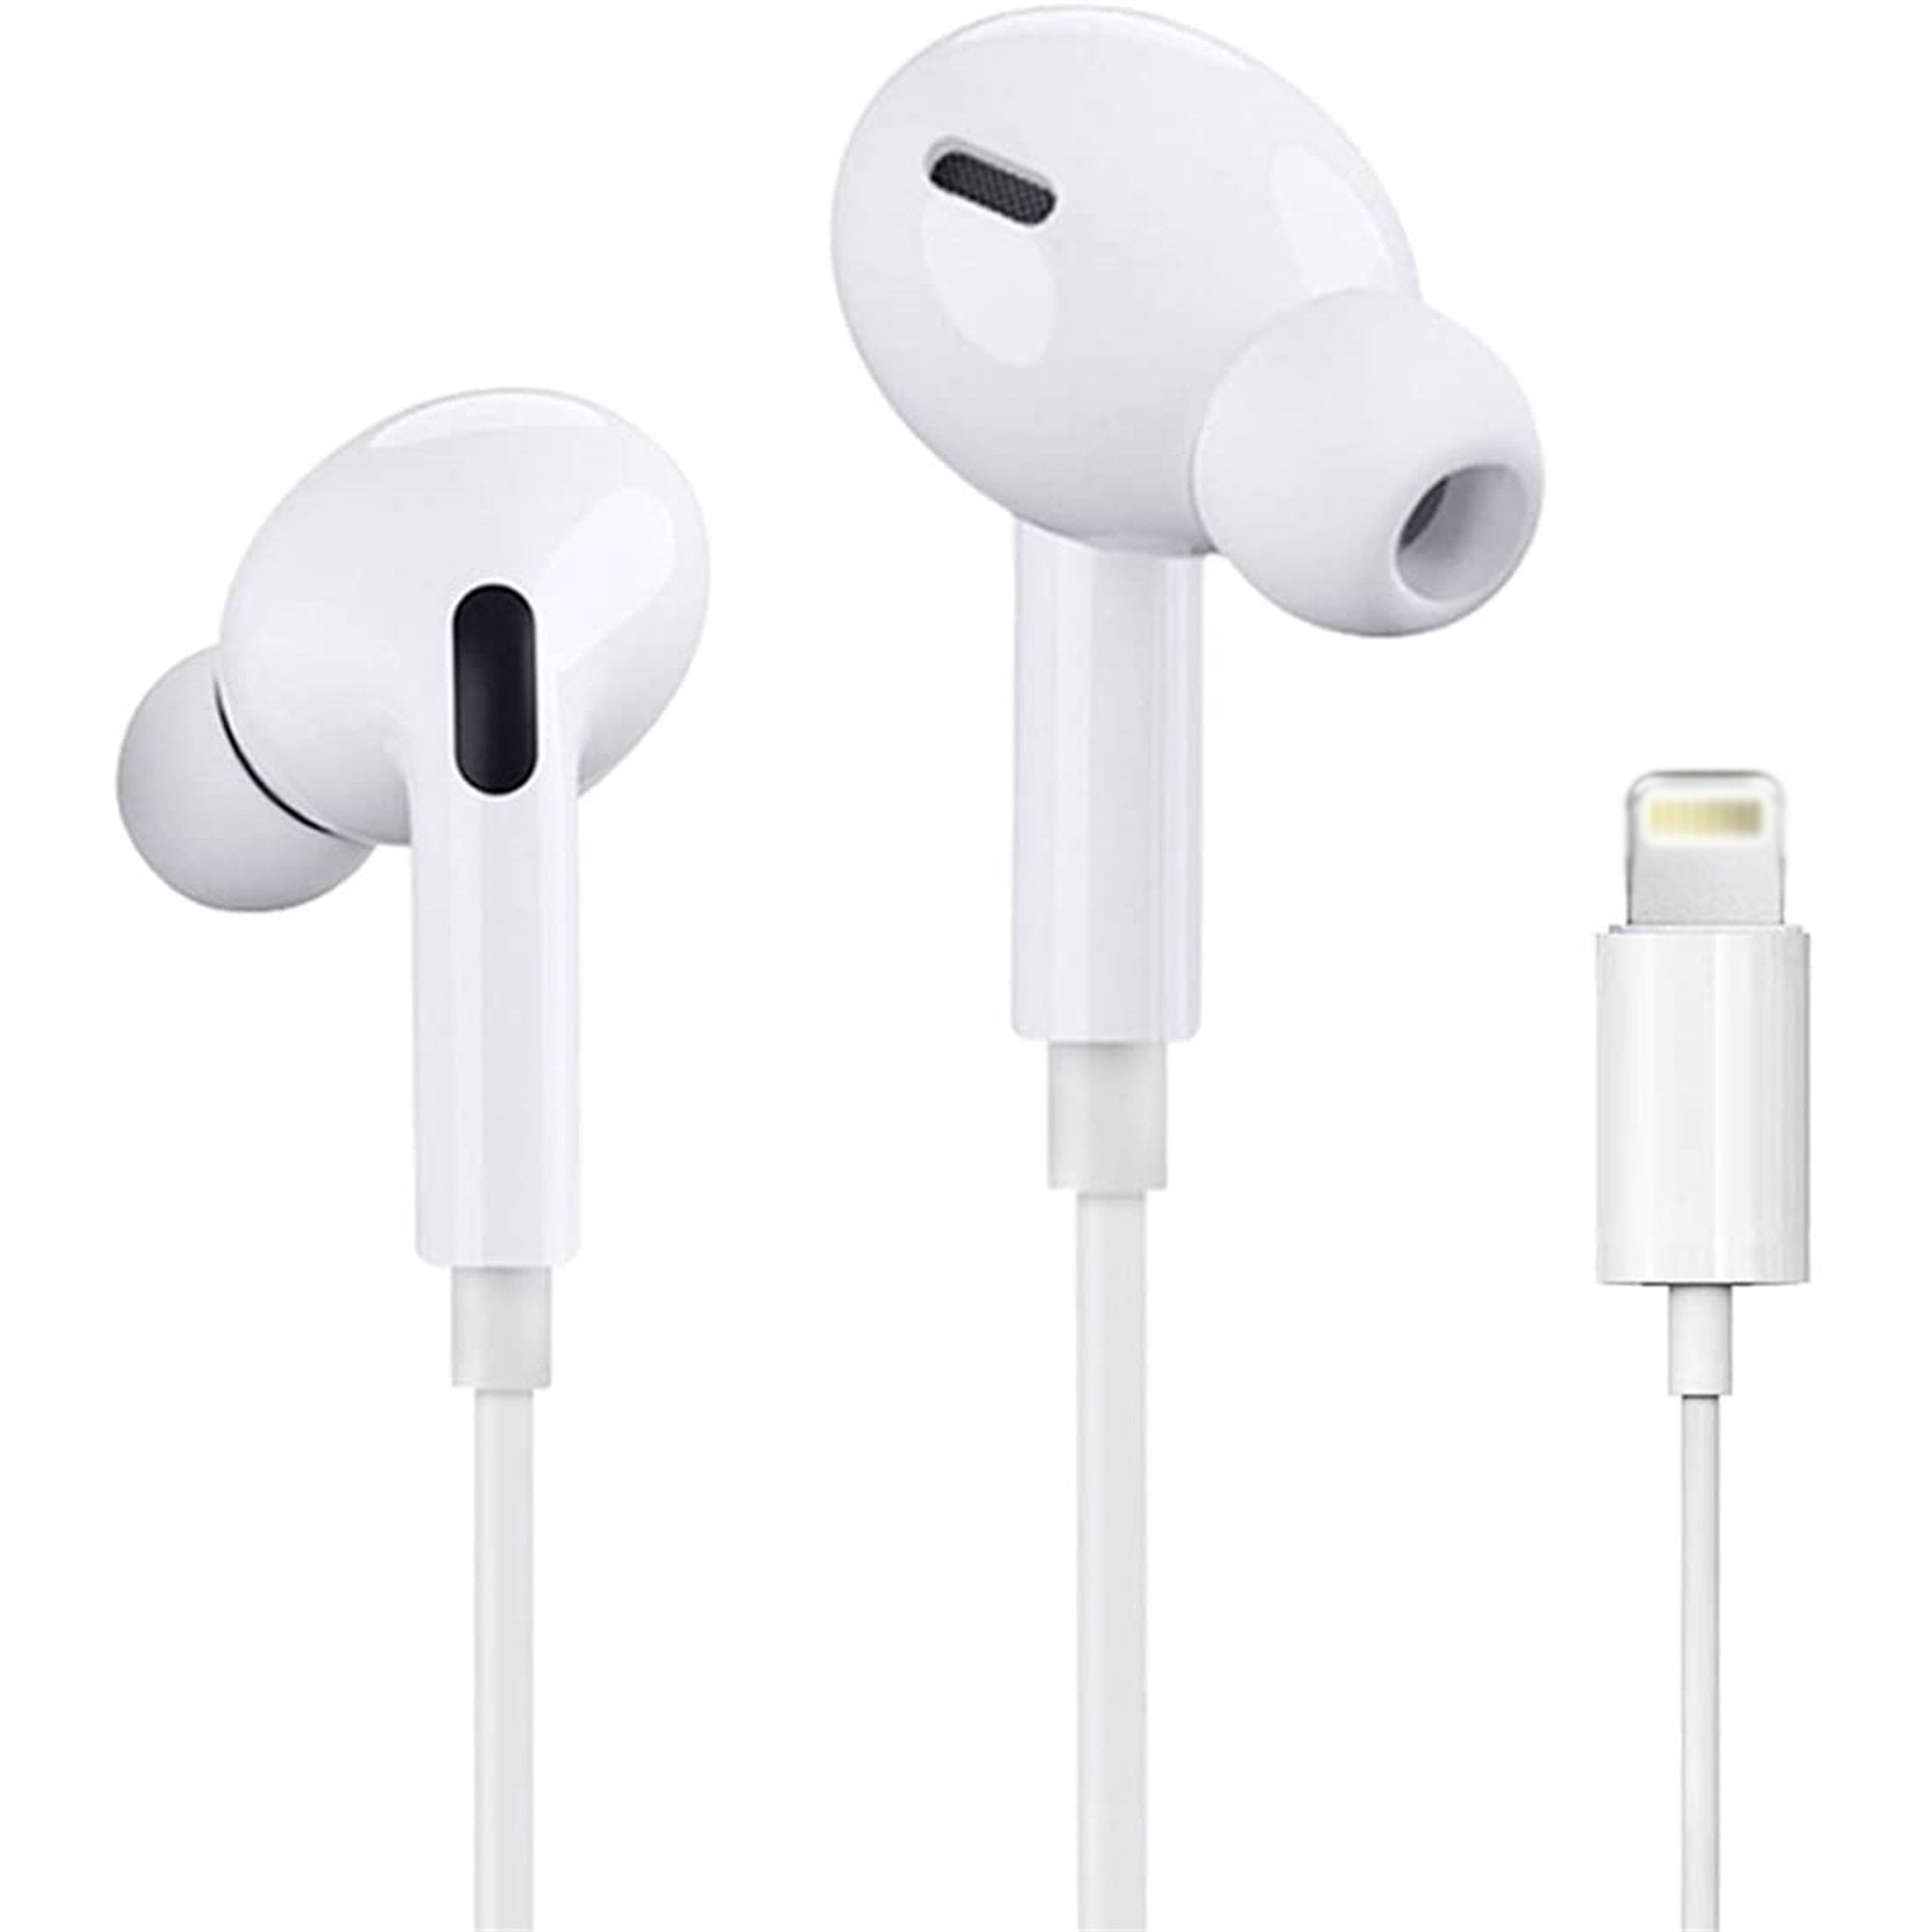 -iPhone Earbuds/Headphones with Lightning Connector, 2-Packs Apple Wired Headphones,Wire-Controlled Audio,Compatible with iPhone 13/12/11/XR/X/8/7/SE,Supports All iOS Systems Apple MFi Certified 